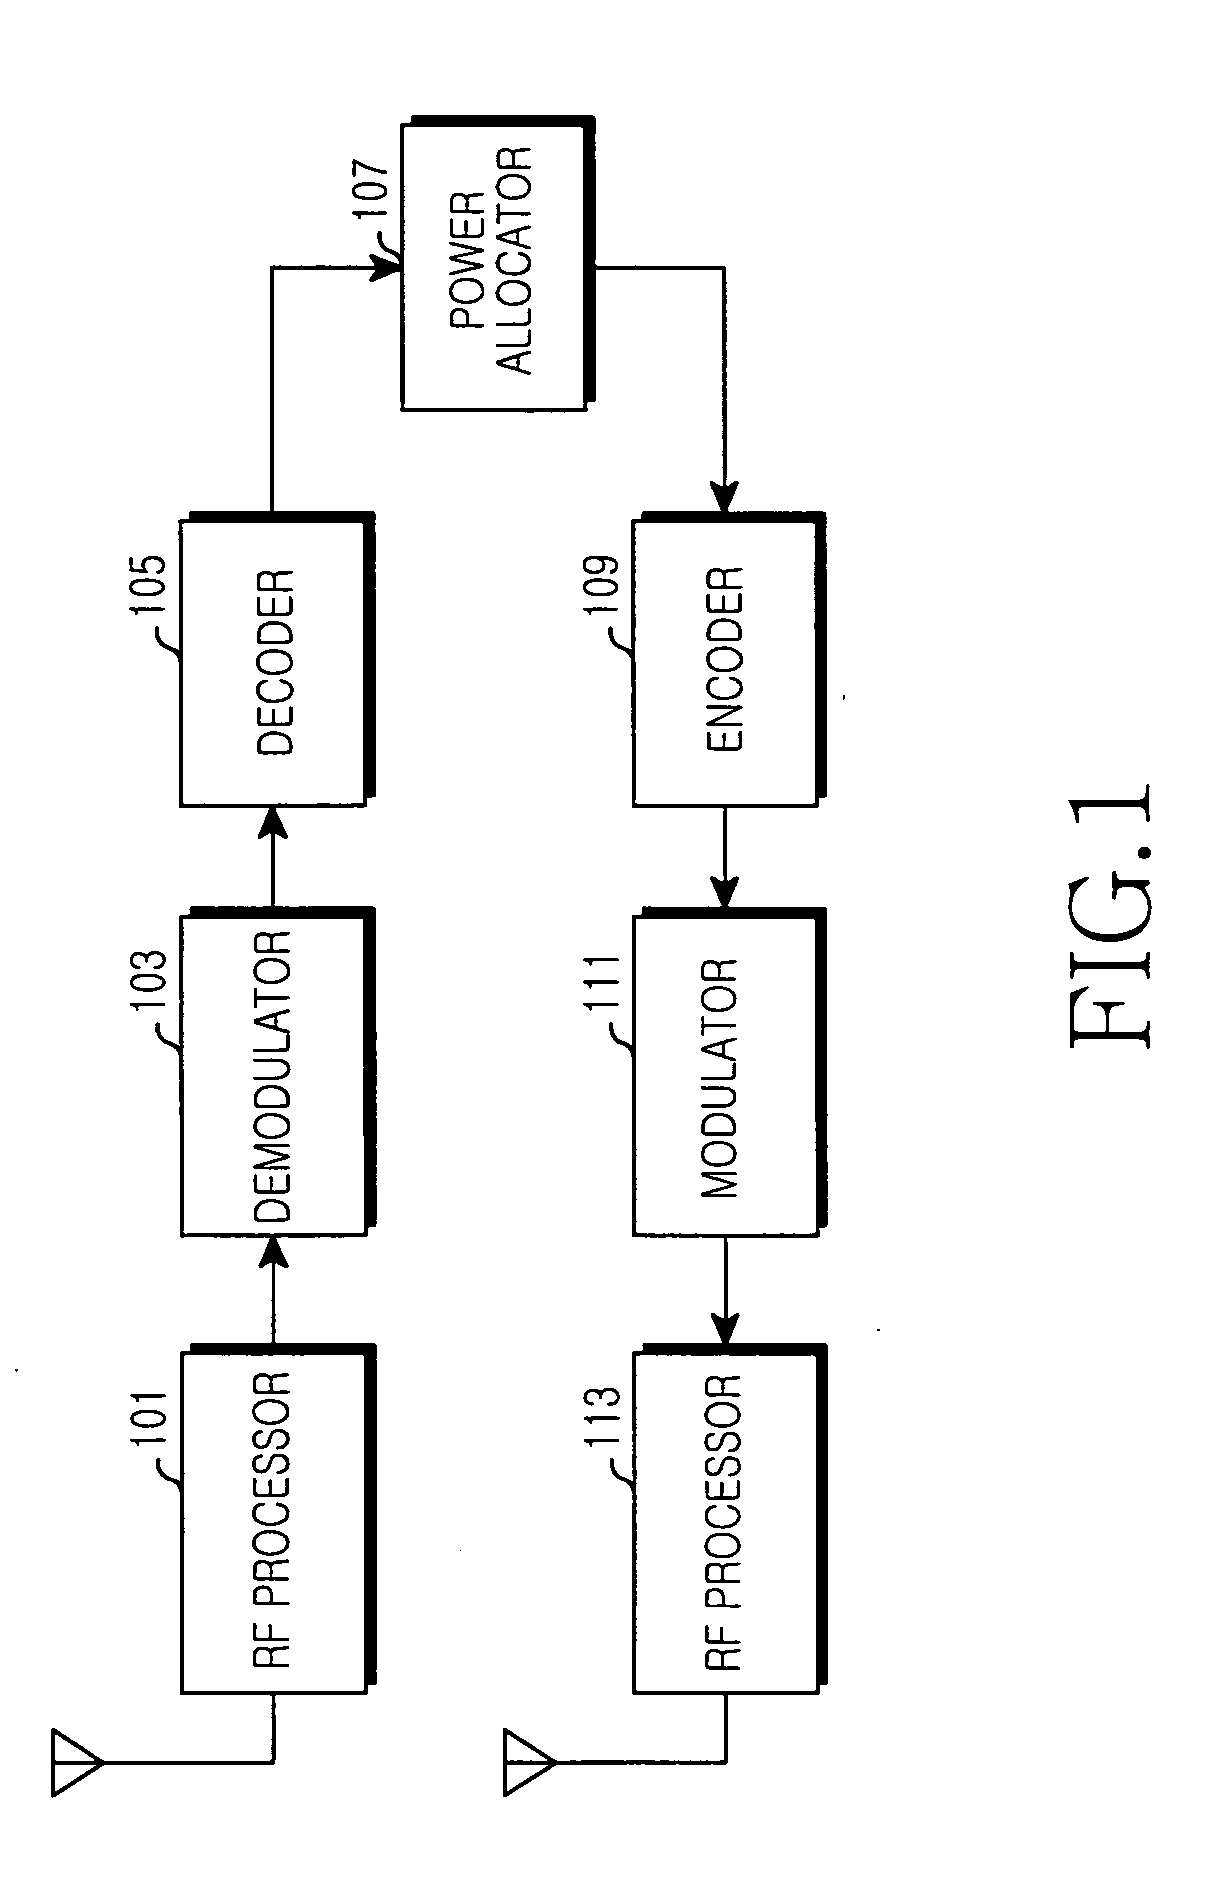 Method and apparatus for transmitting signals in a multi-hop wireless communication system